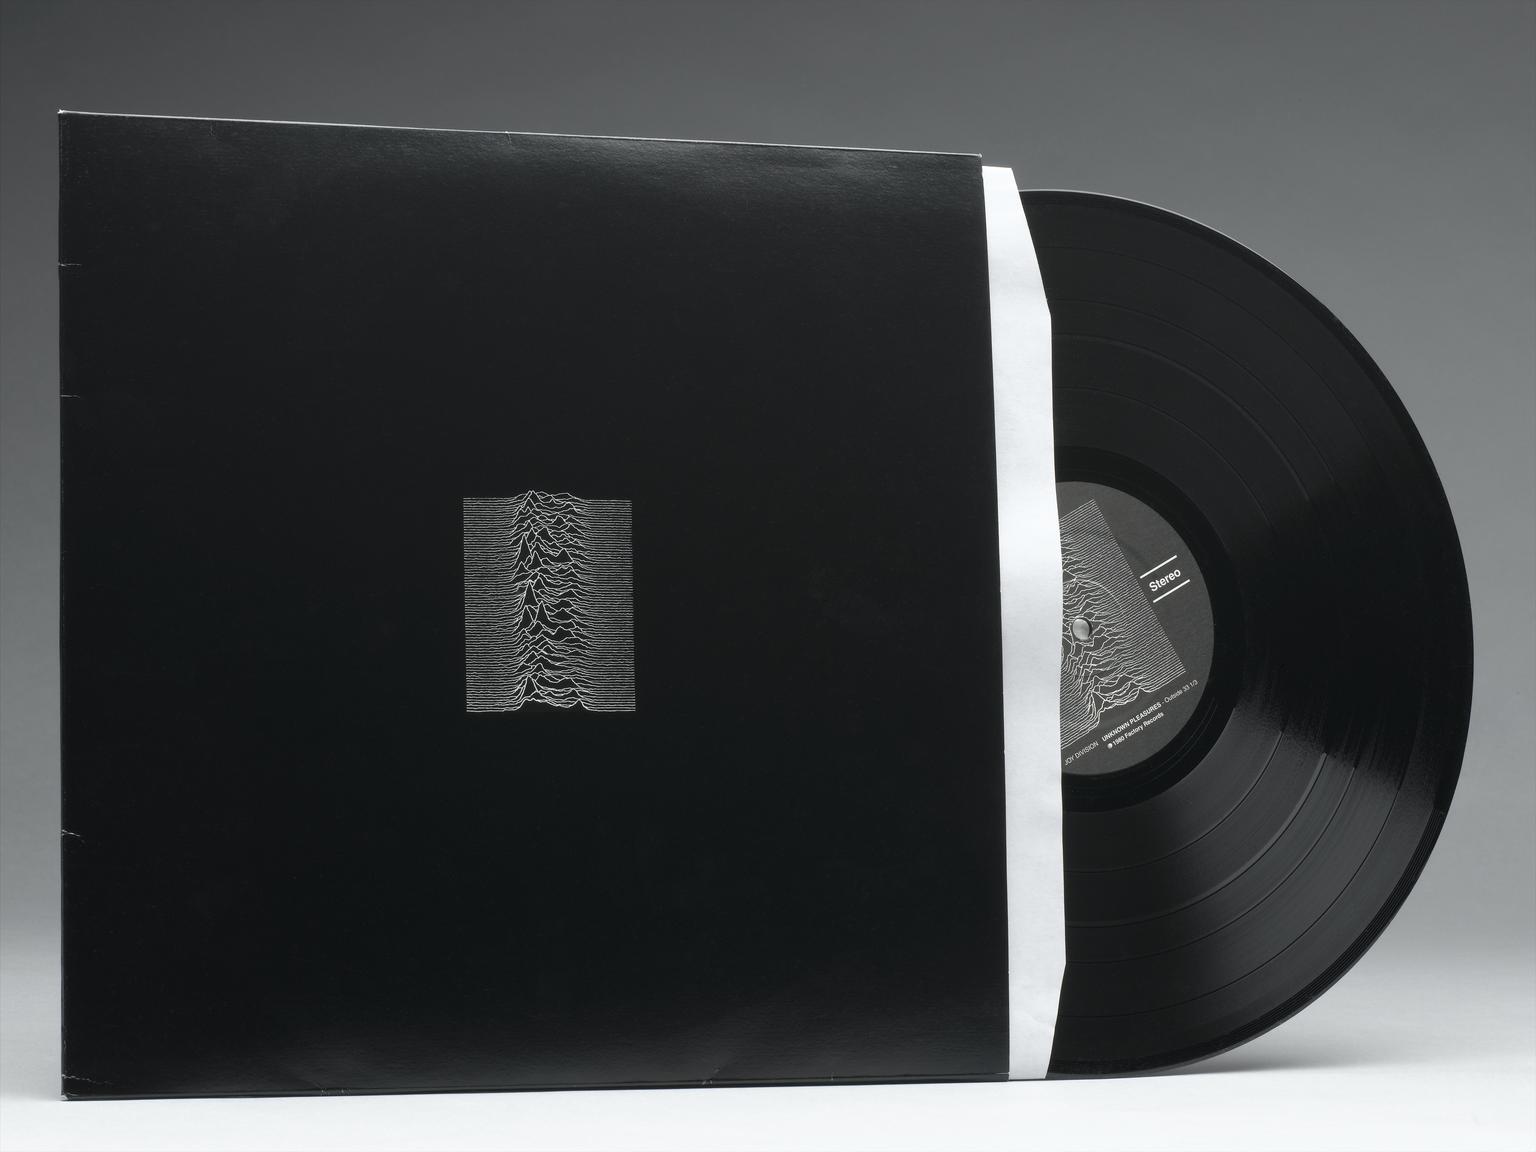 A vinyl record of the album Unknown Pleasures by Joy Division. It is half out of the sleeve. The sleeve is black with a small design of white wavy lines at the centre.